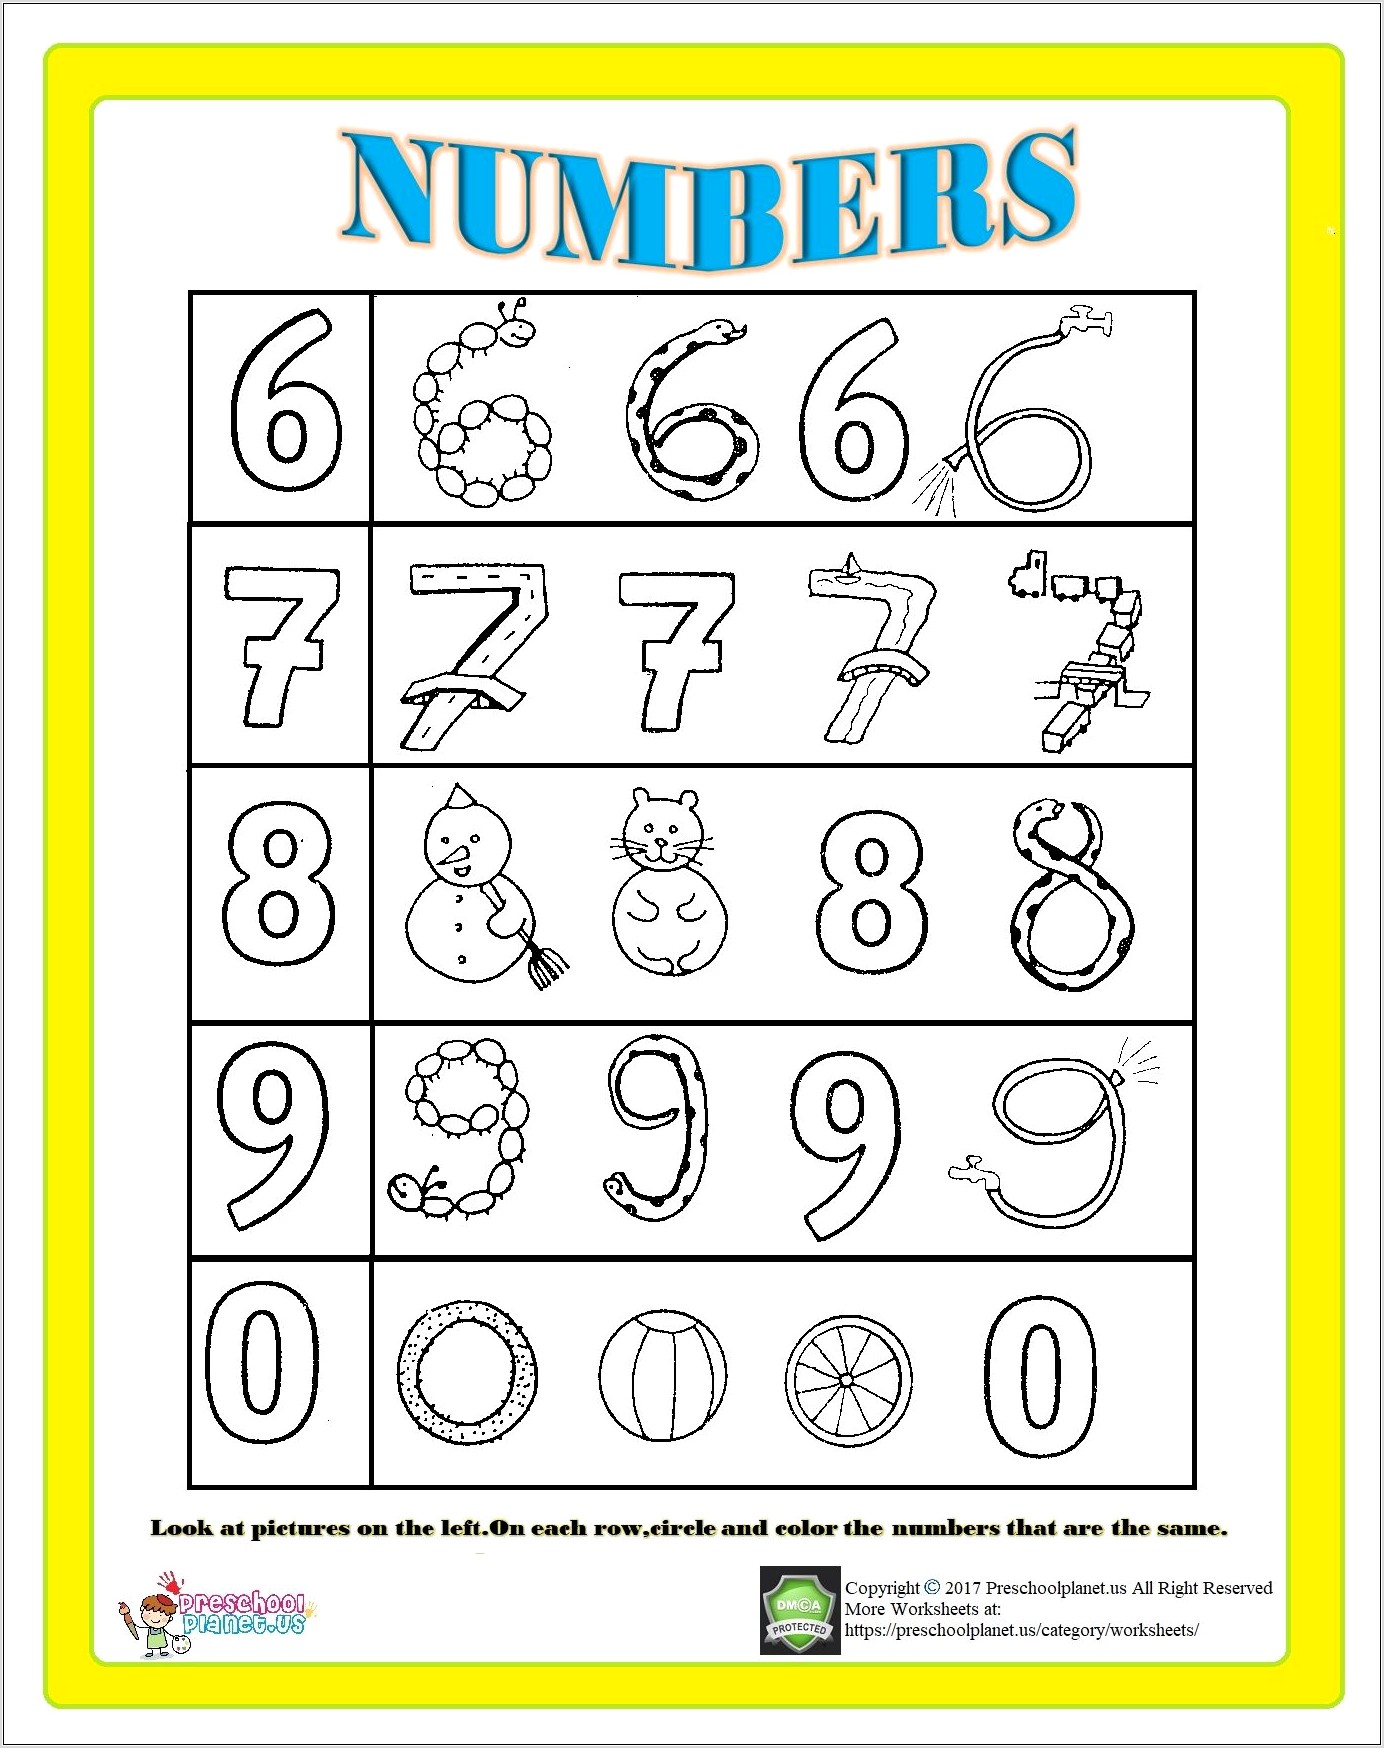 Worksheet For Mixed Numbers